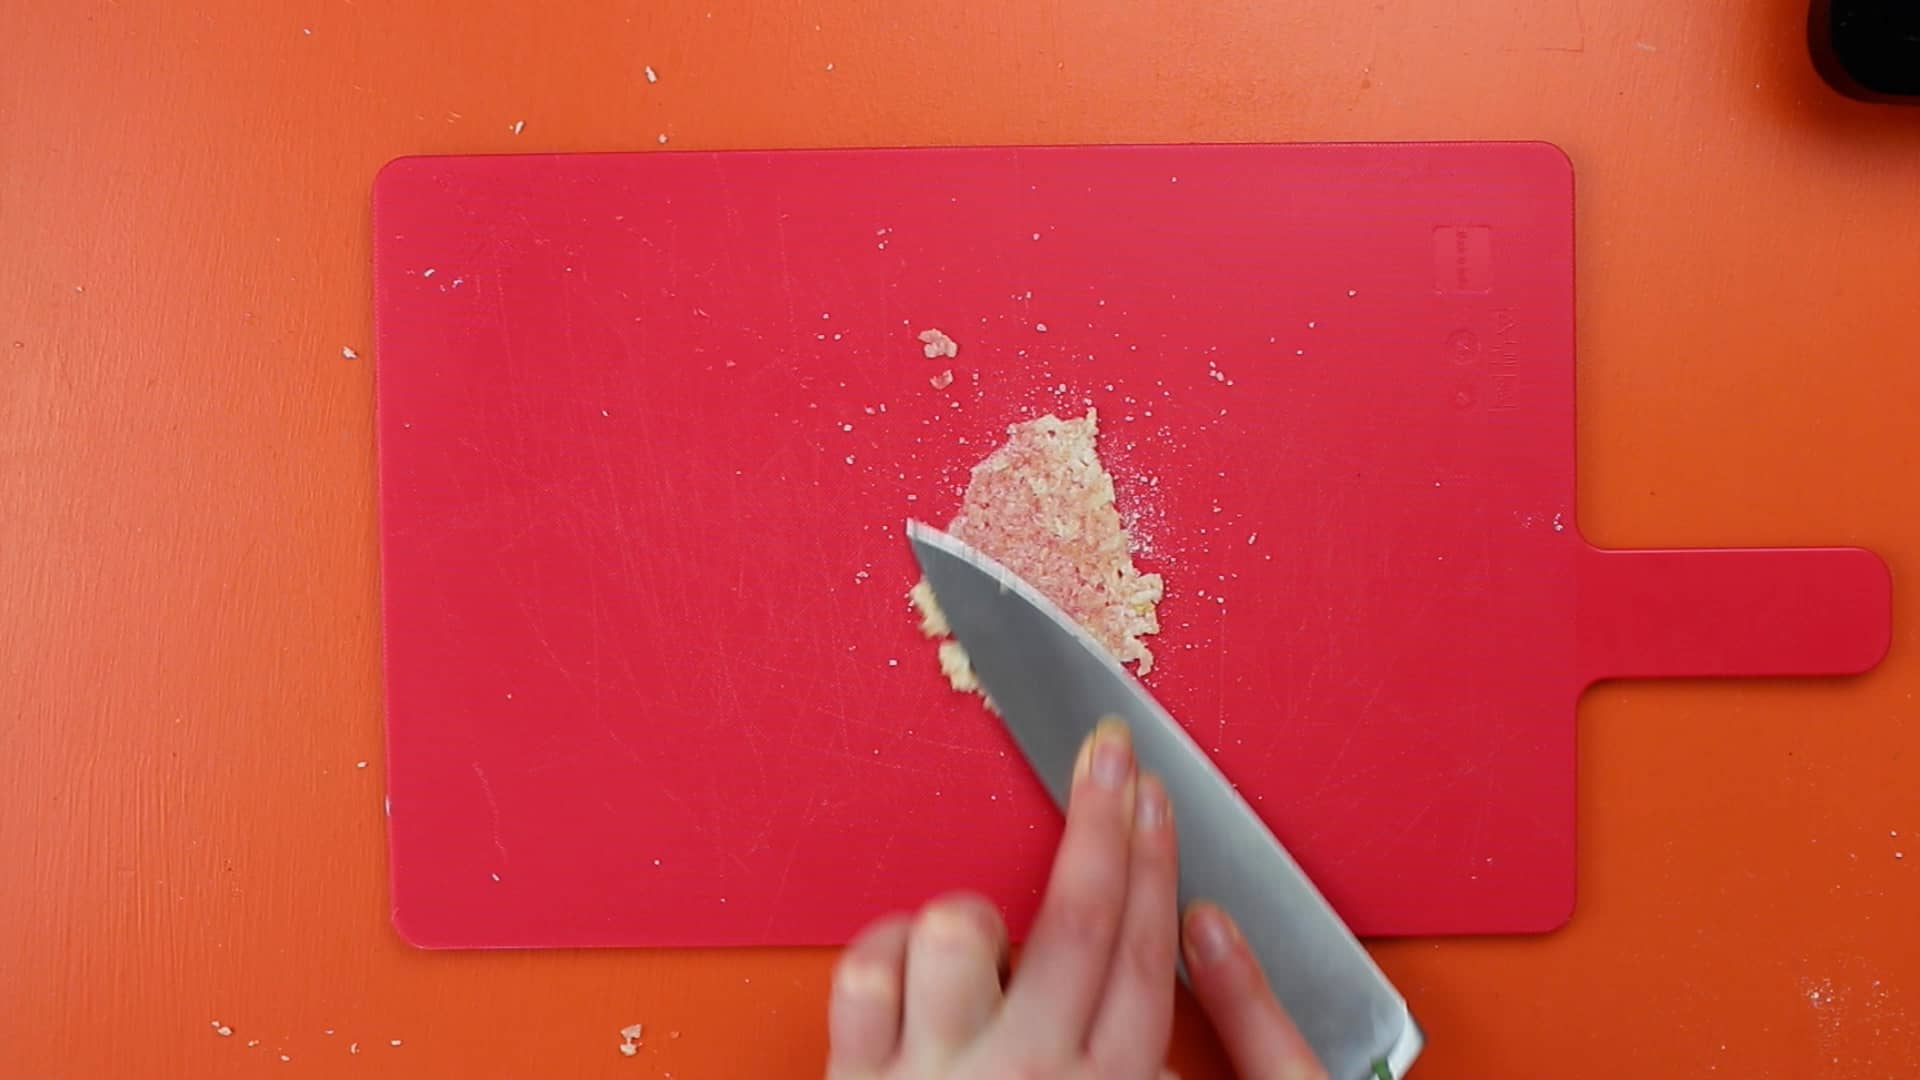 Garlic being pressed with knife on a pink chopping board on an orange background.